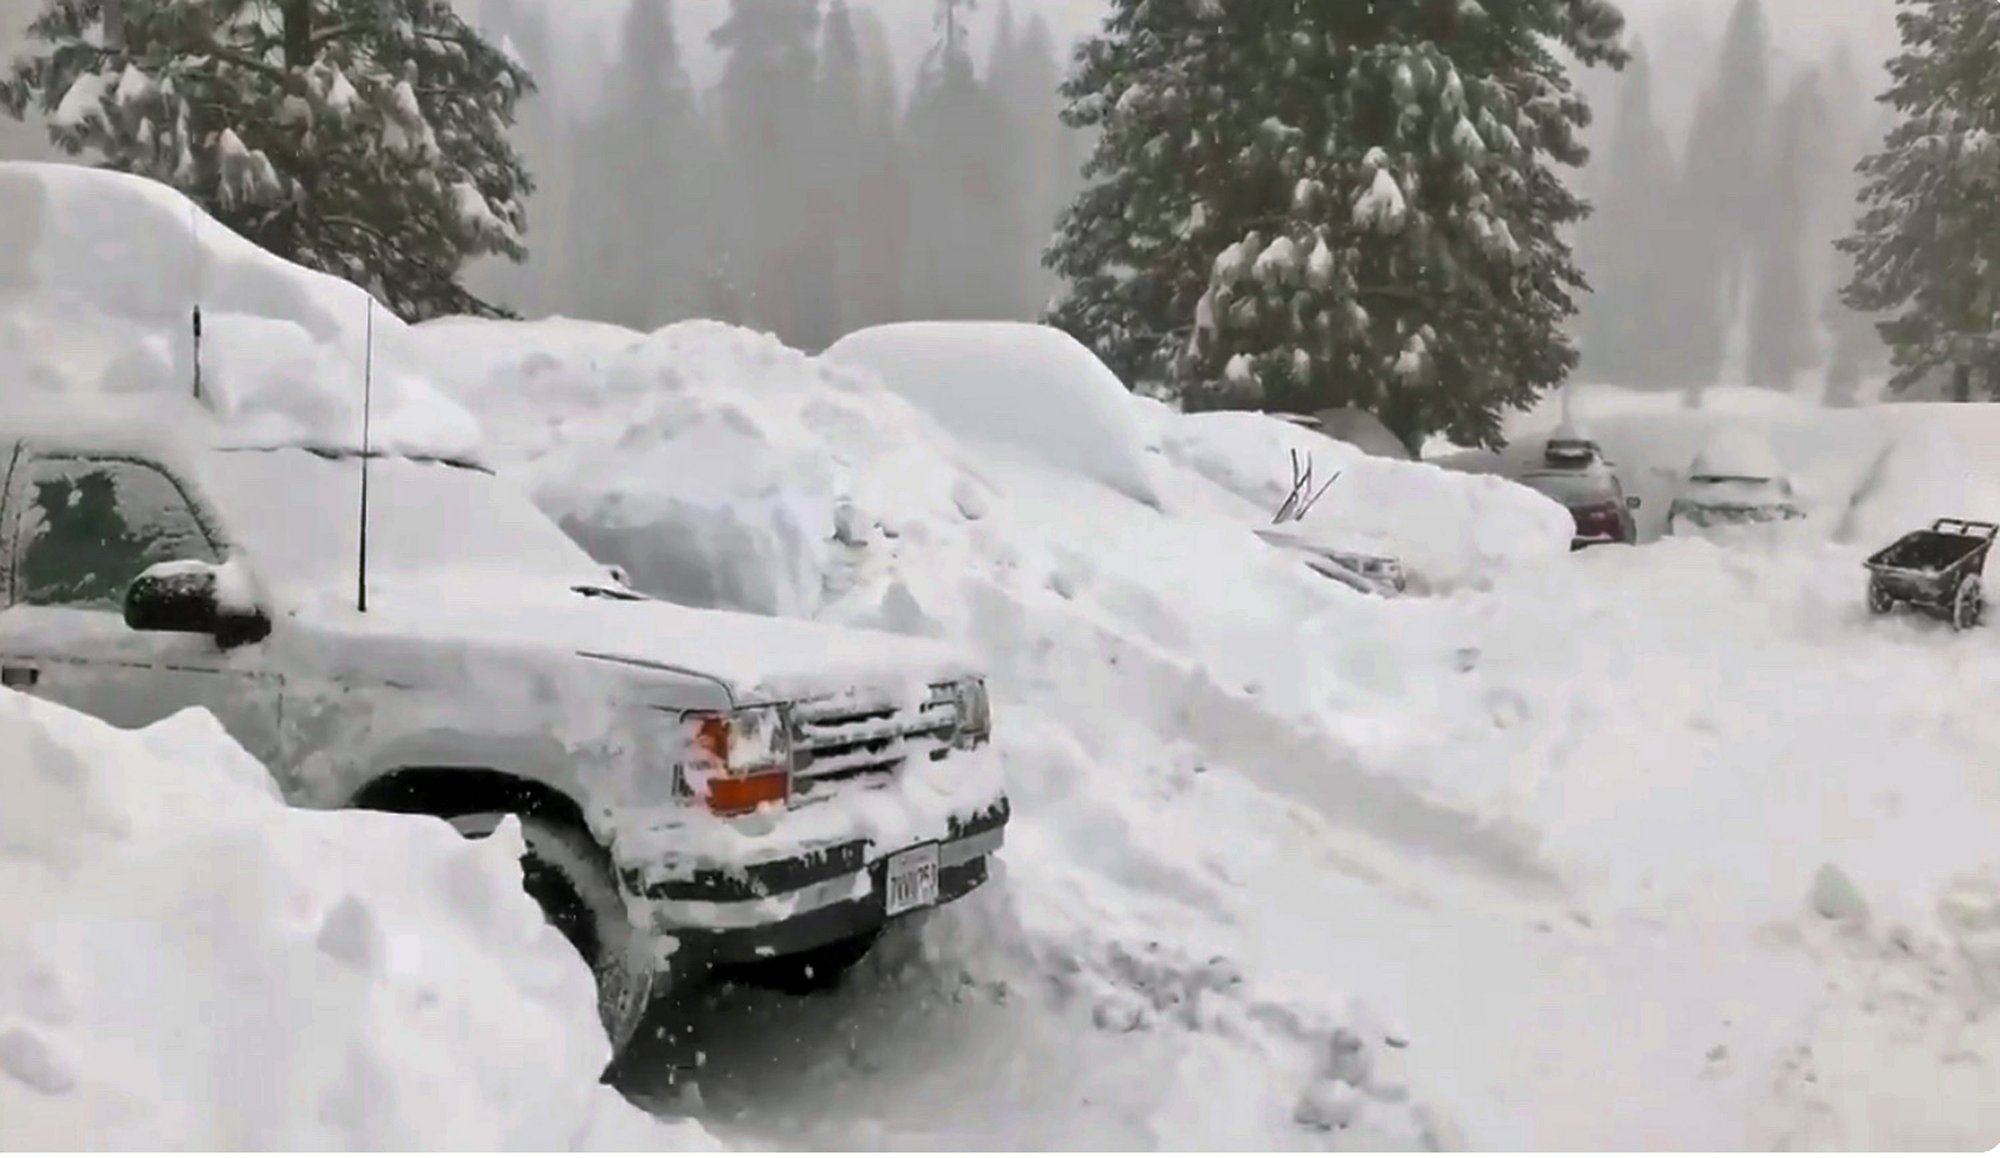 in-california-the-snow-storm-caught-off-guard-120-people-cutting-them-off-from-civilization